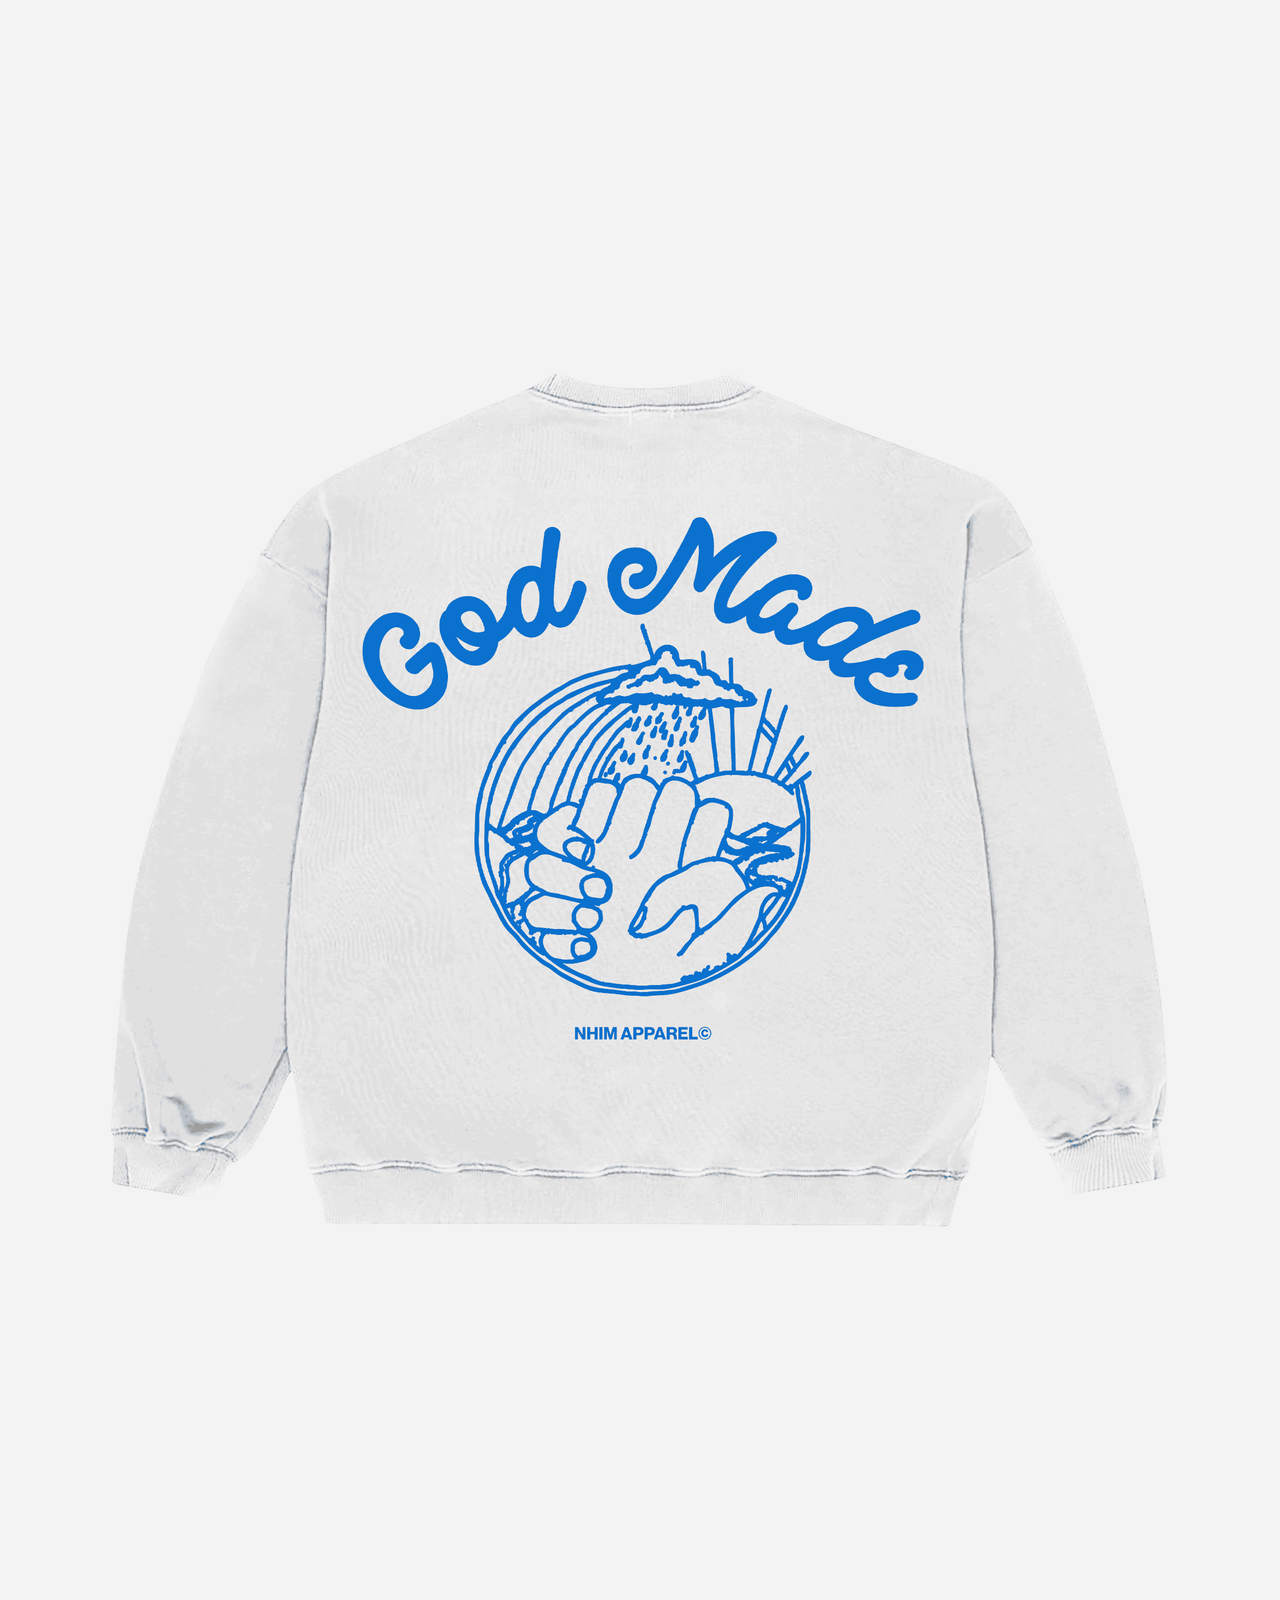 God Made white crew neck sweatshirt with blue graphic made by NHIM APPAREL christian clothing brand